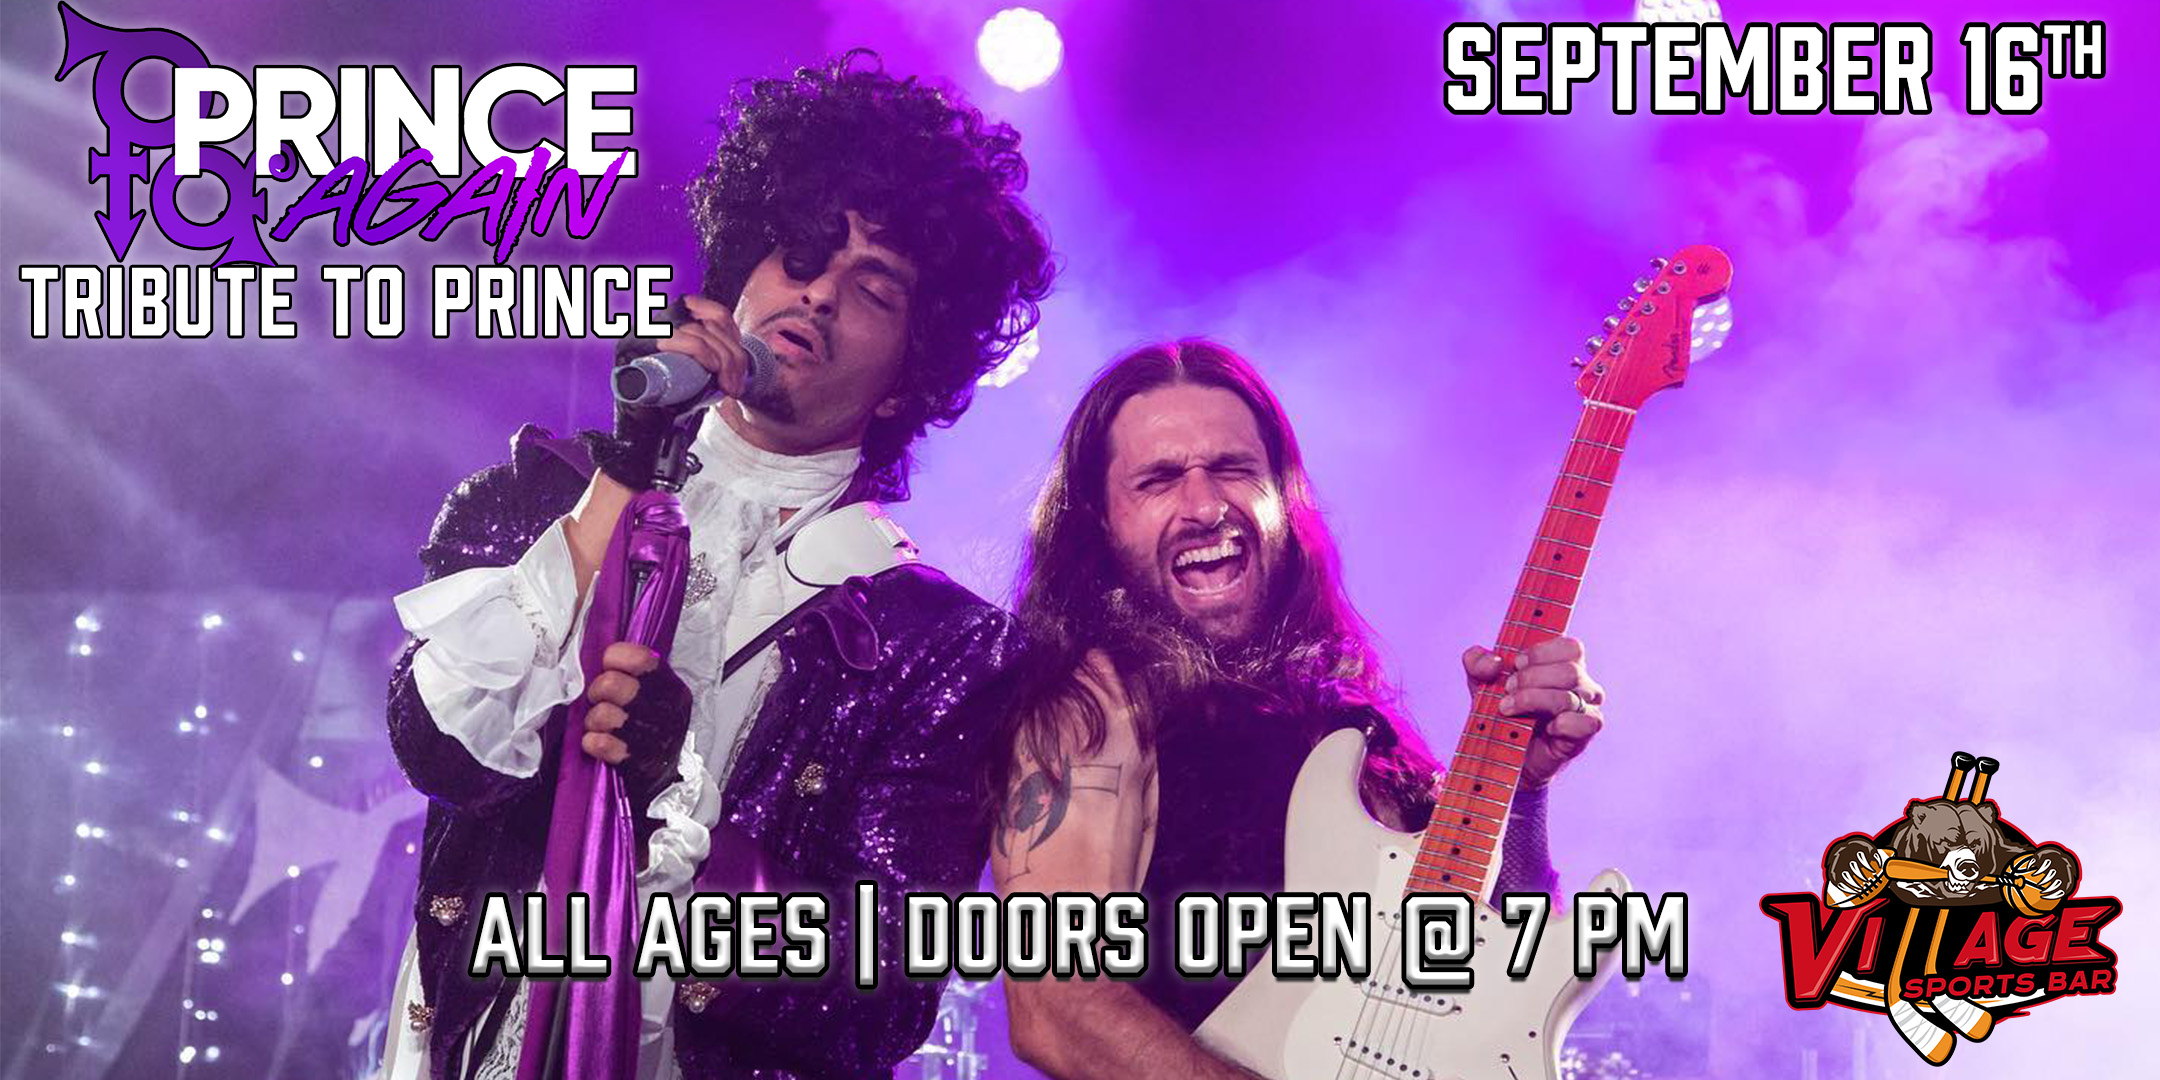 Village Sports Bar Presents: Prince Again - Tribute to Prince